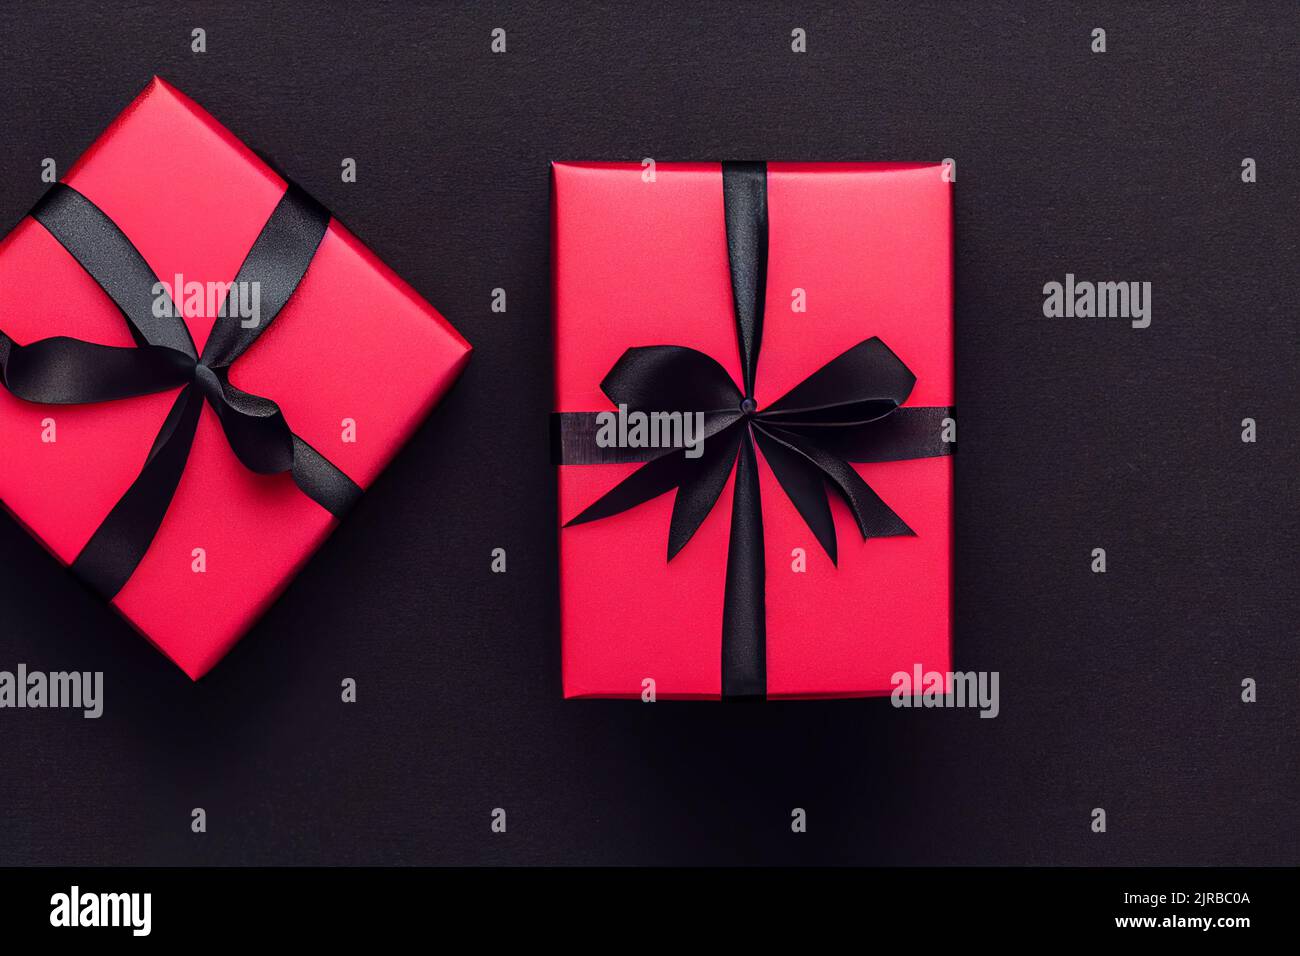 Gift box with gold coloured wrapping paper and a black ribbon and bow Stock  Photo - Alamy